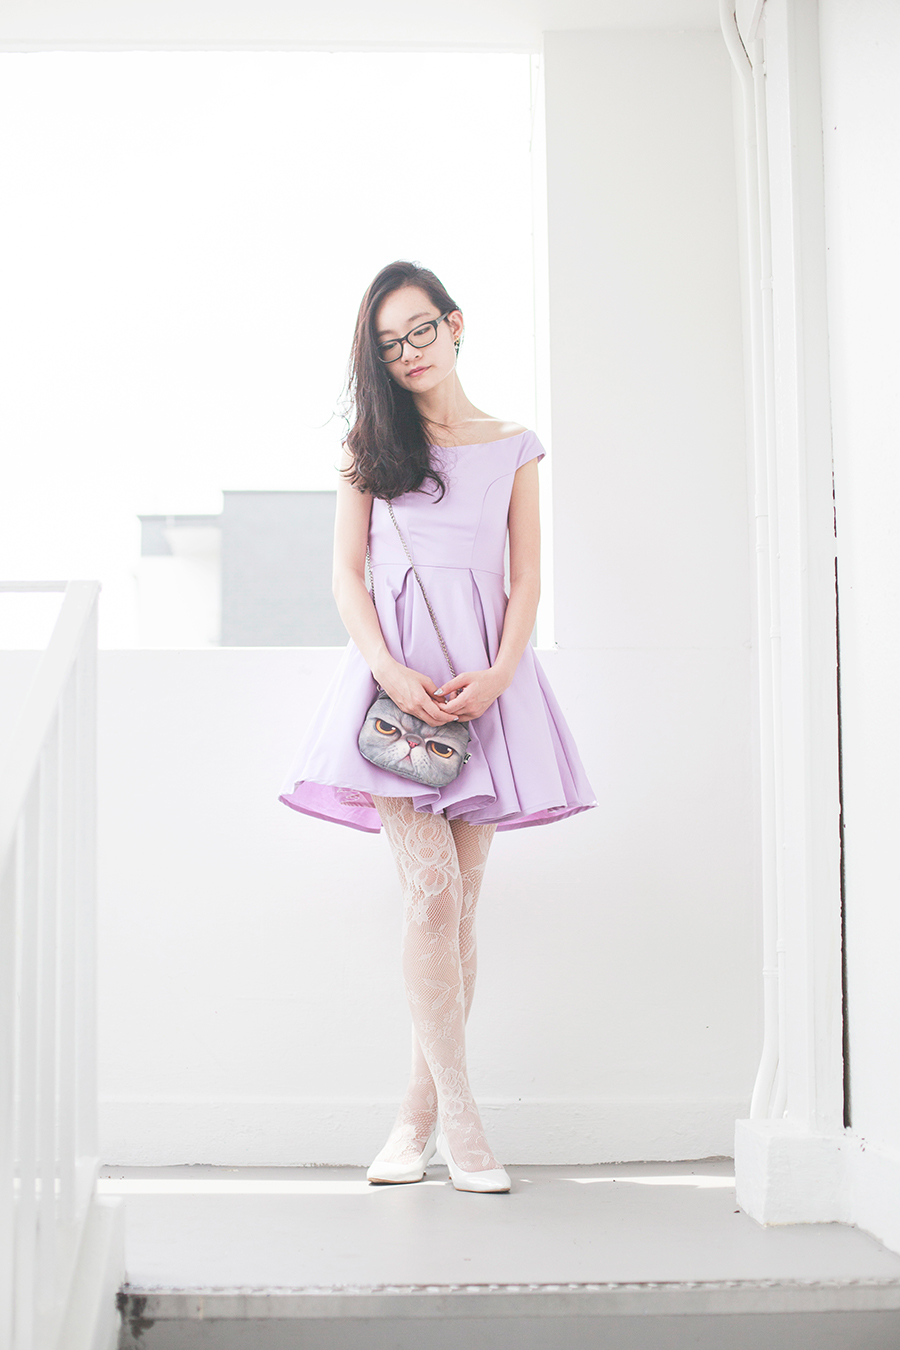 Wedding bridesmaid outfit: The Velvet Dolls Arianna Off-Shoulder Dress in Lilac, Miwo grumpy cat face bag, Forever 21 white lace tights, Vincci white pumps, Osewaya mermaid earrings, Gap black frame glasses